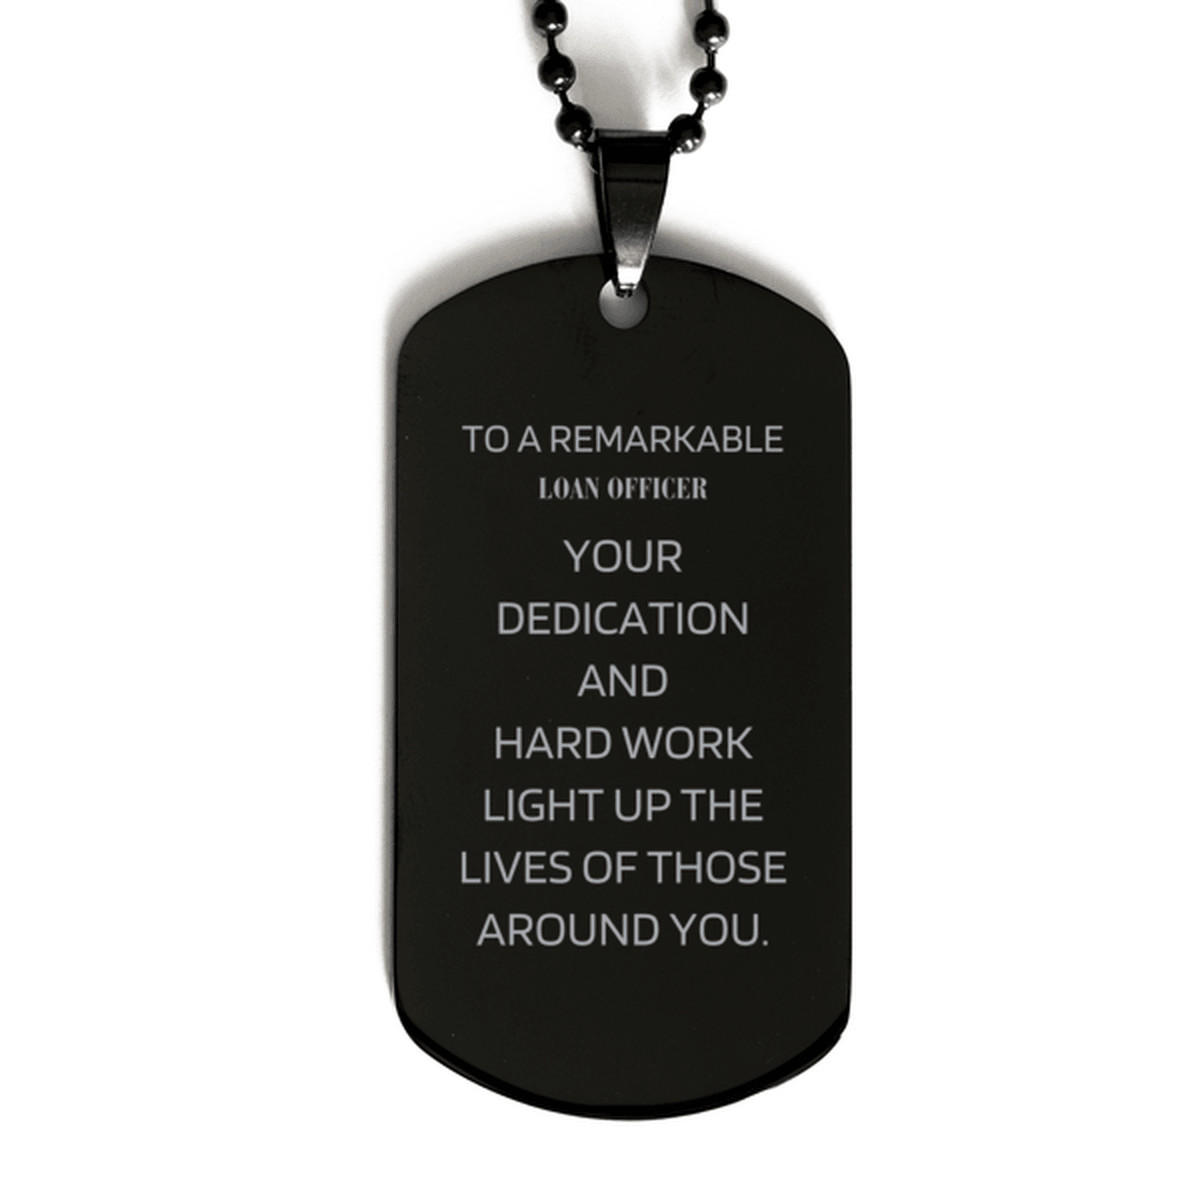 Remarkable Loan Officer Gifts, Your dedication and hard work, Inspirational Birthday Christmas Unique Black Dog Tag For Loan Officer, Coworkers, Men, Women, Friends - Mallard Moon Gift Shop